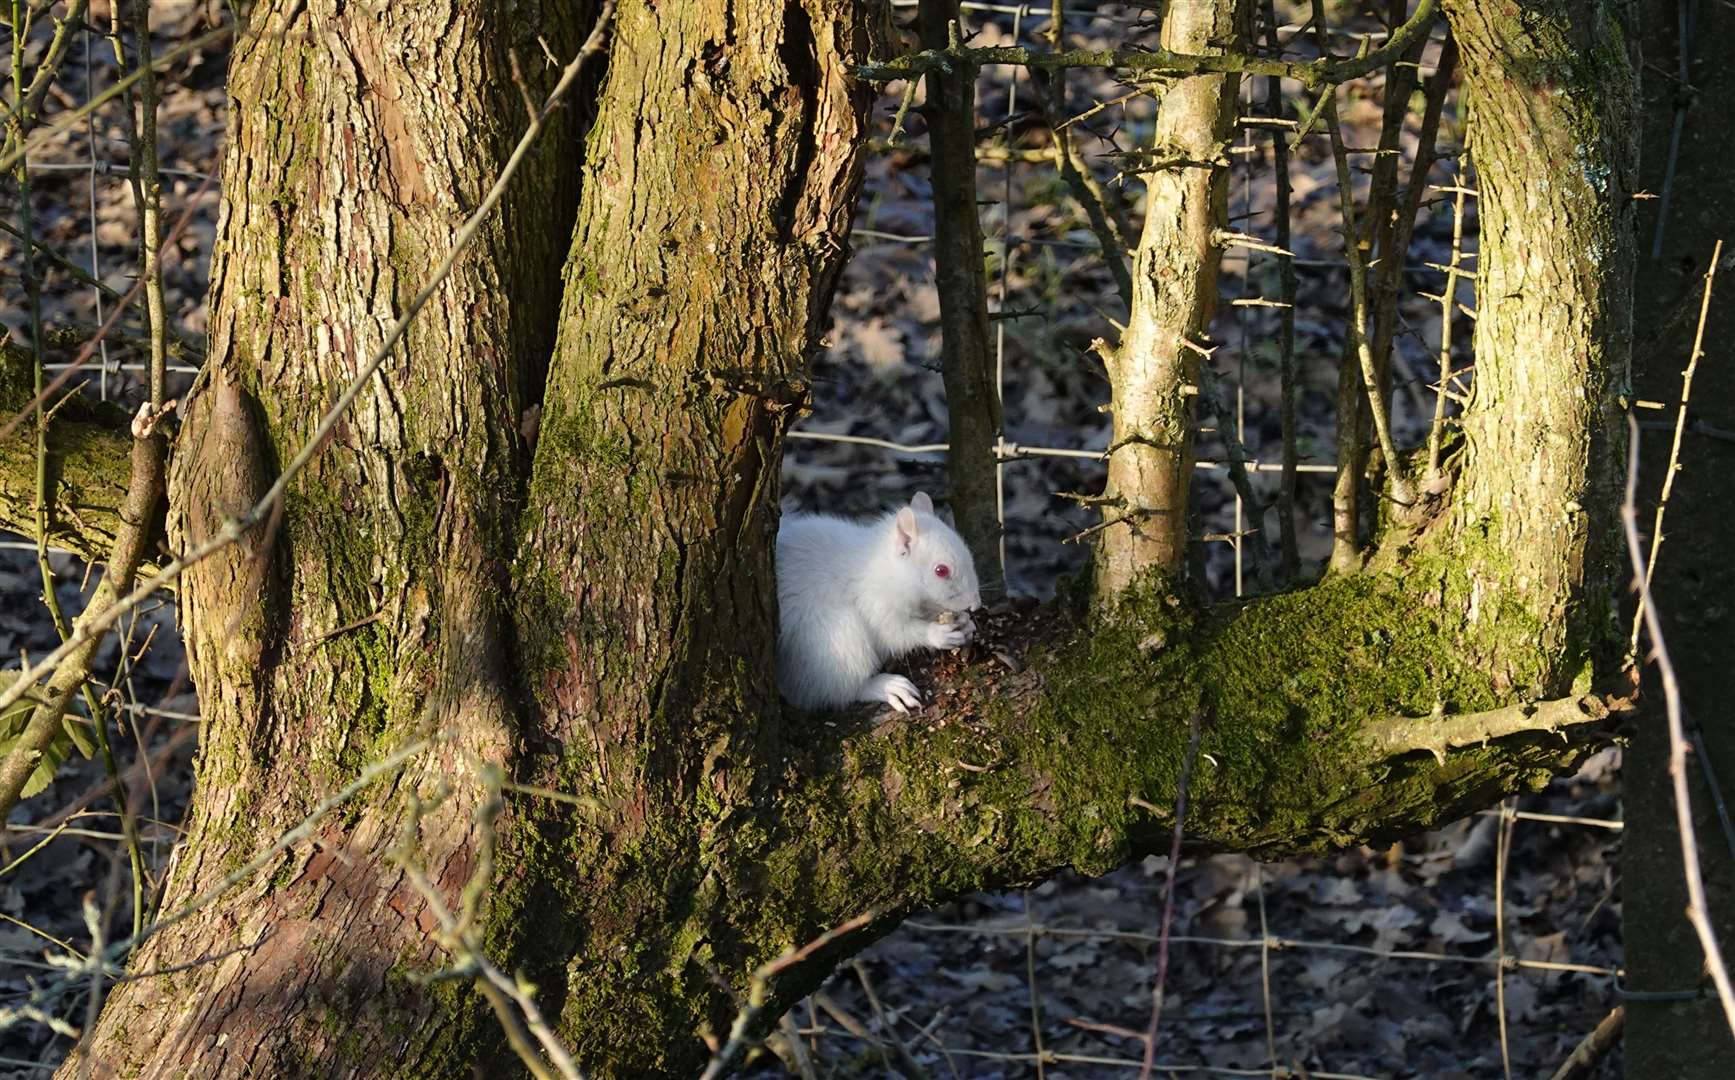 The squirrel was spotted in a tree in squirrel (Clive Marshall/PA)